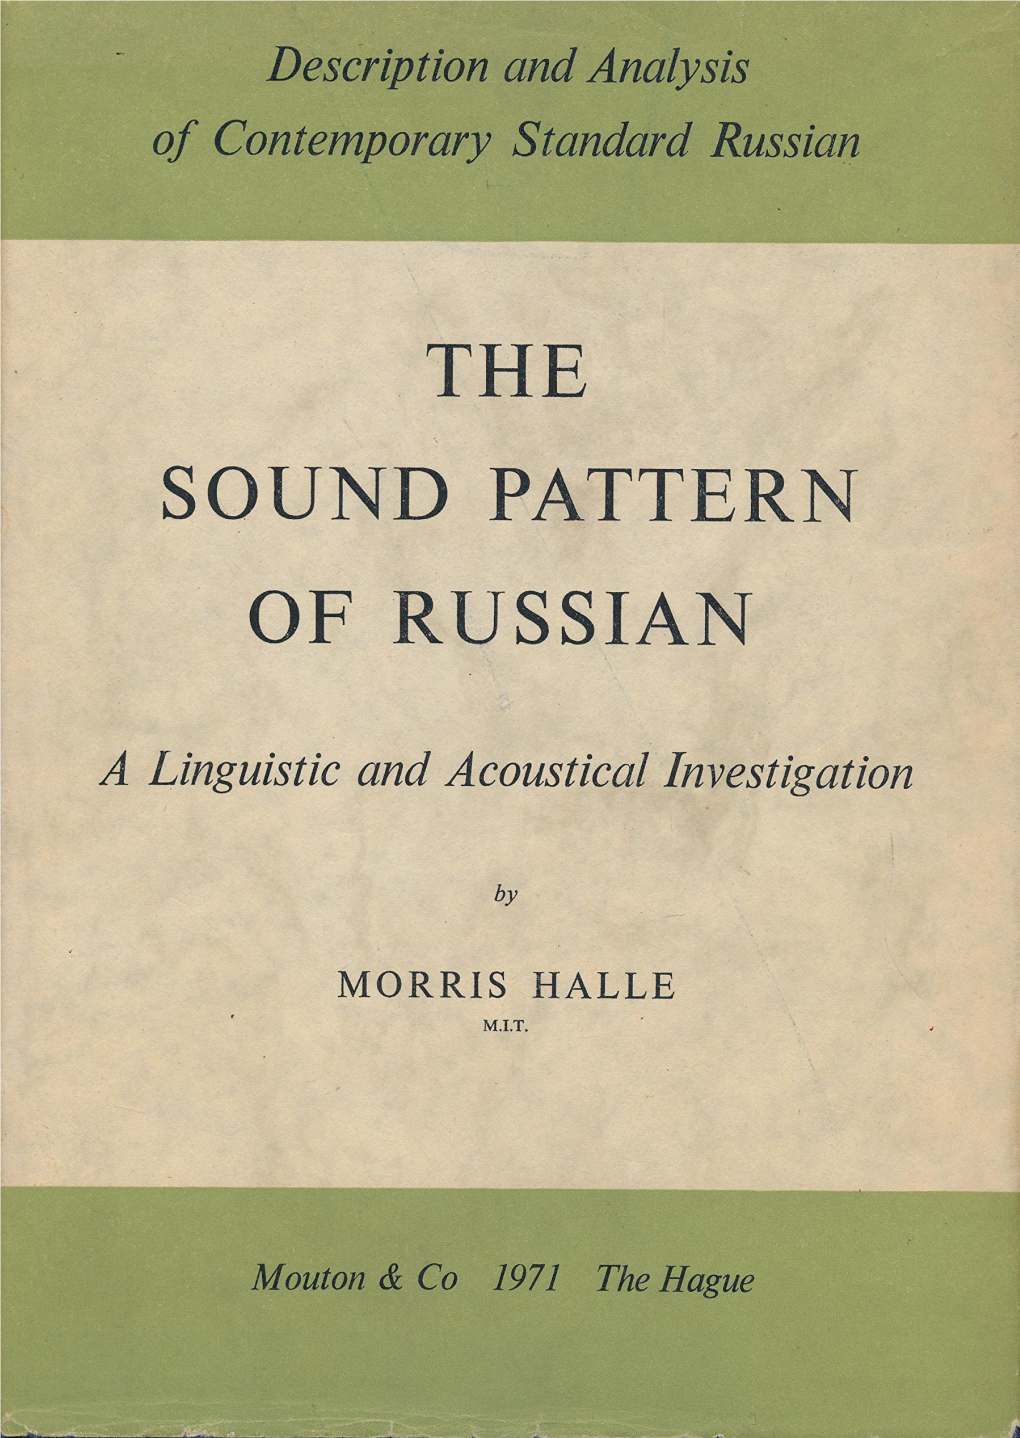 The Sound Pattern of Russian Description and Analysis of Contemporary Standard Russian